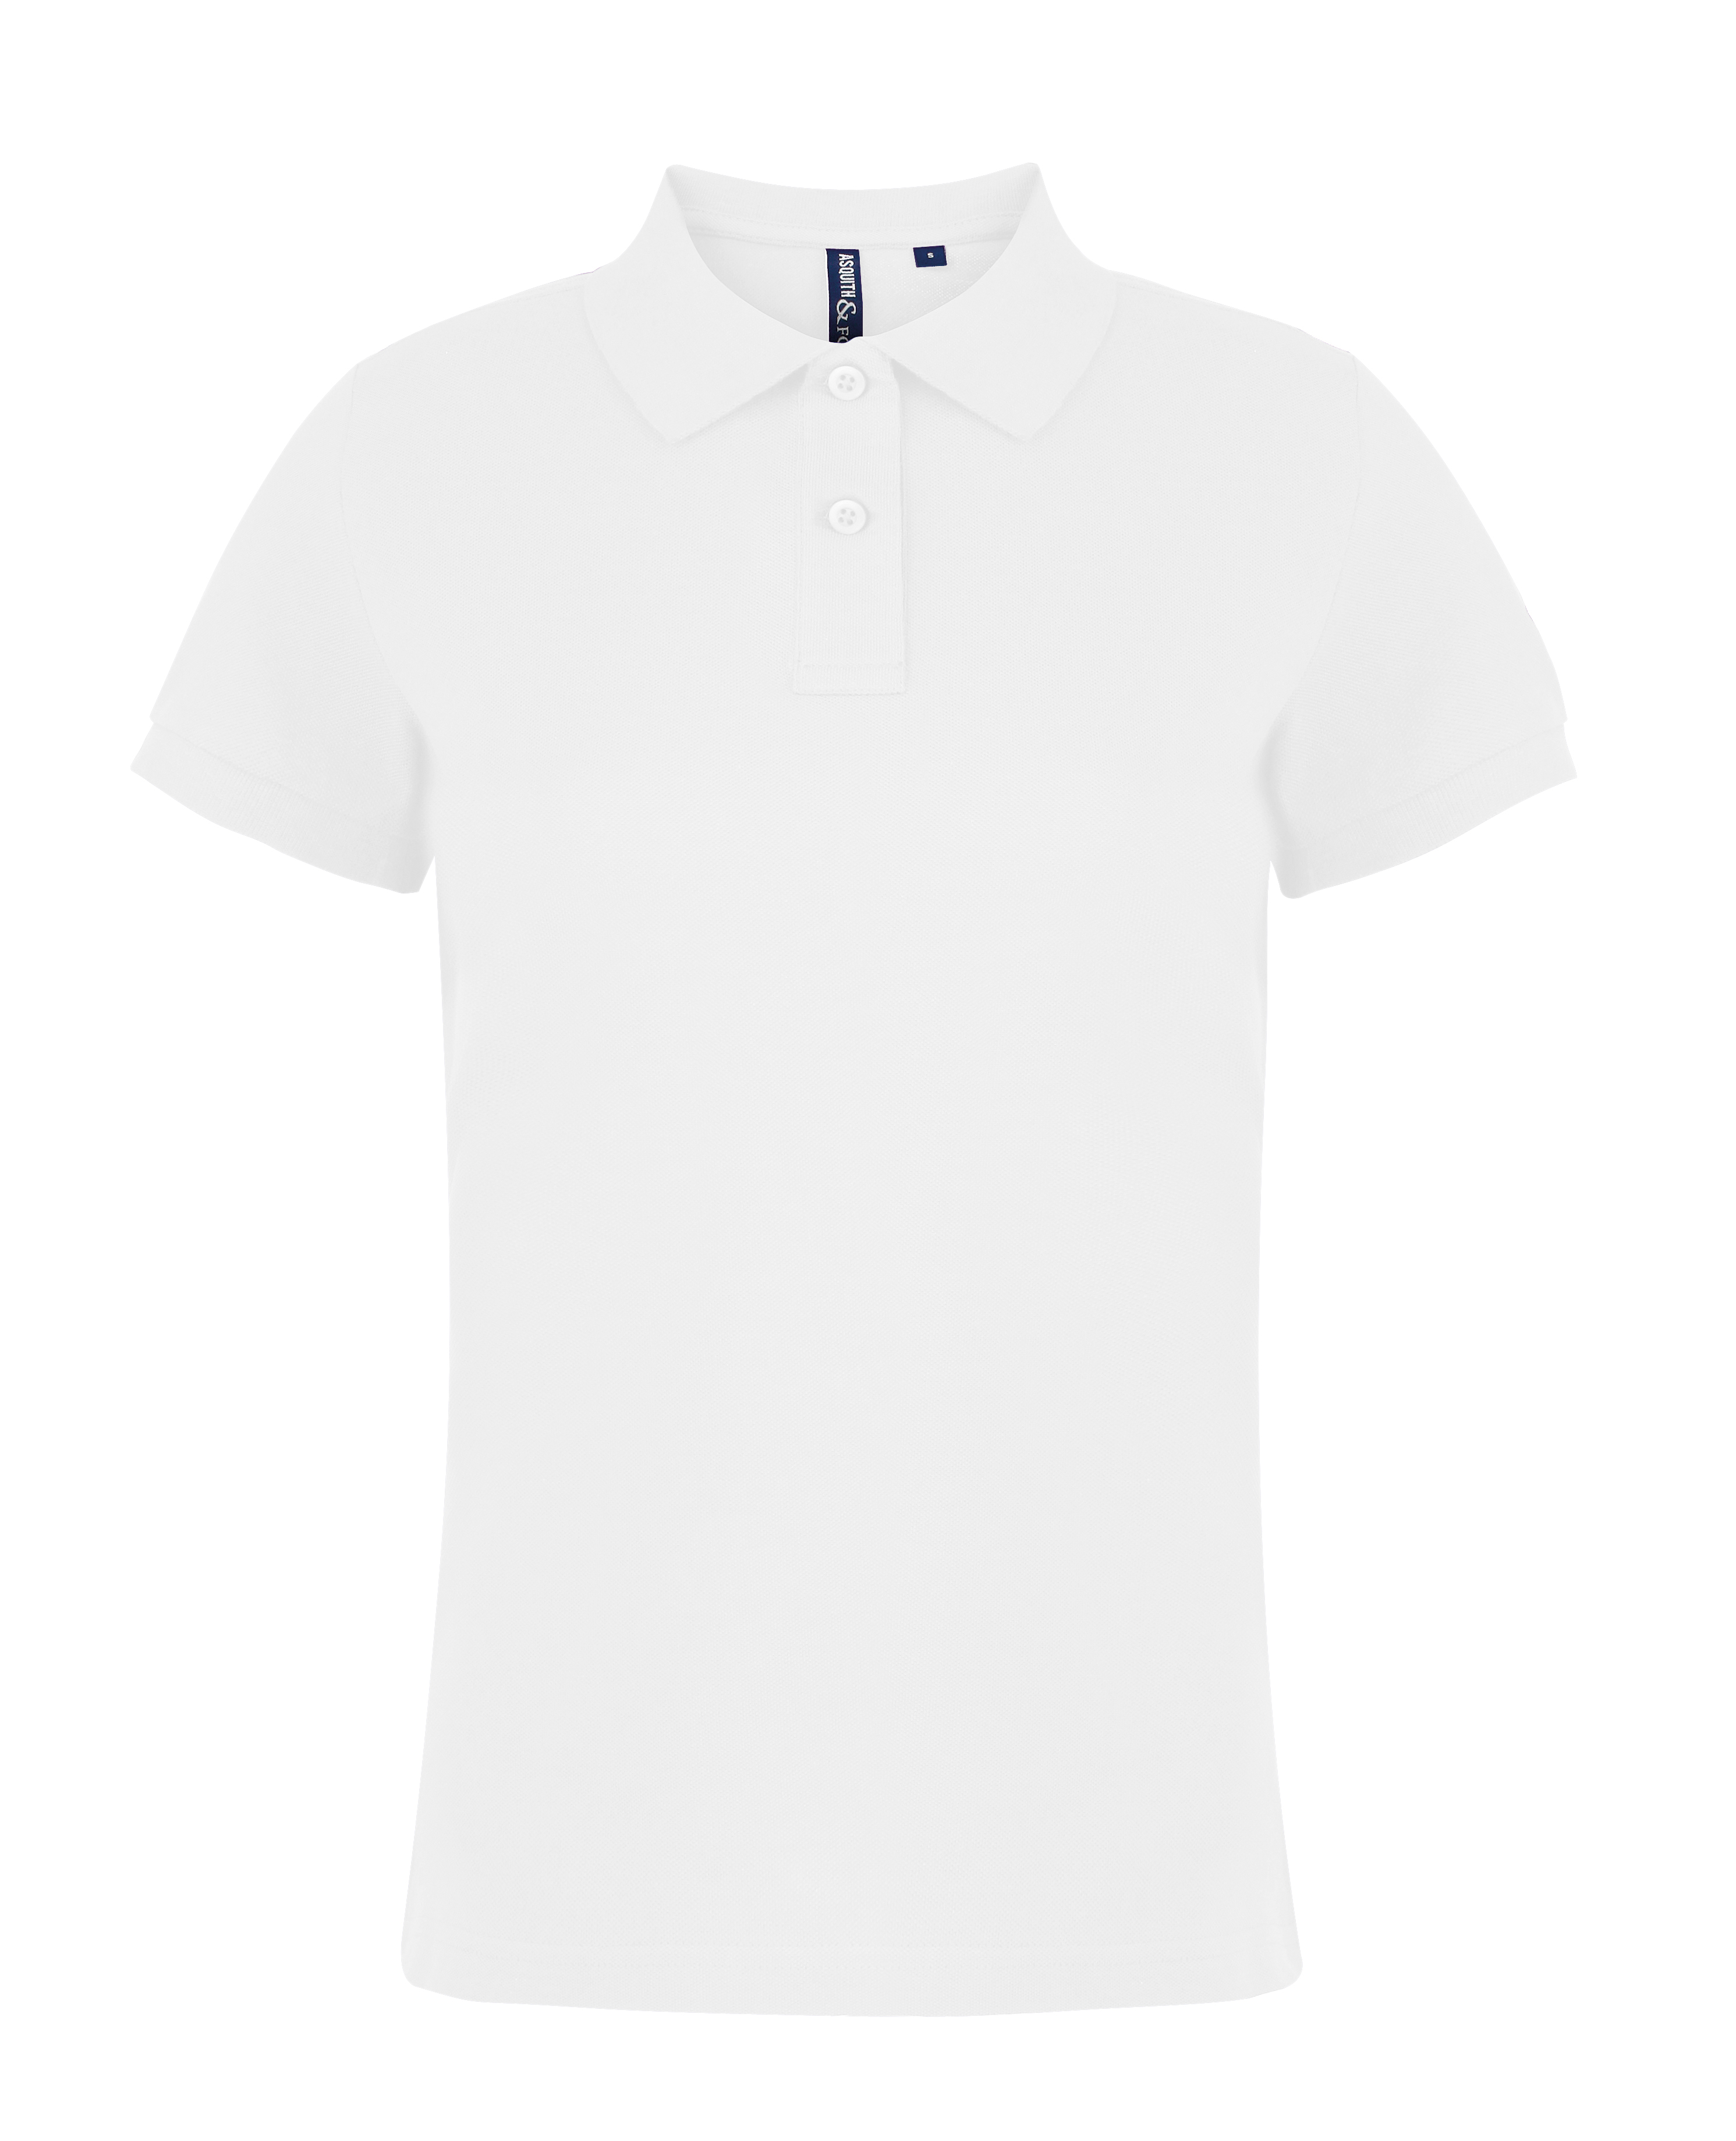 ax-httpswebsystems.s3.amazonaws.comtmp_for_downloadasquith-and-fox-womens-polo-white.jpg